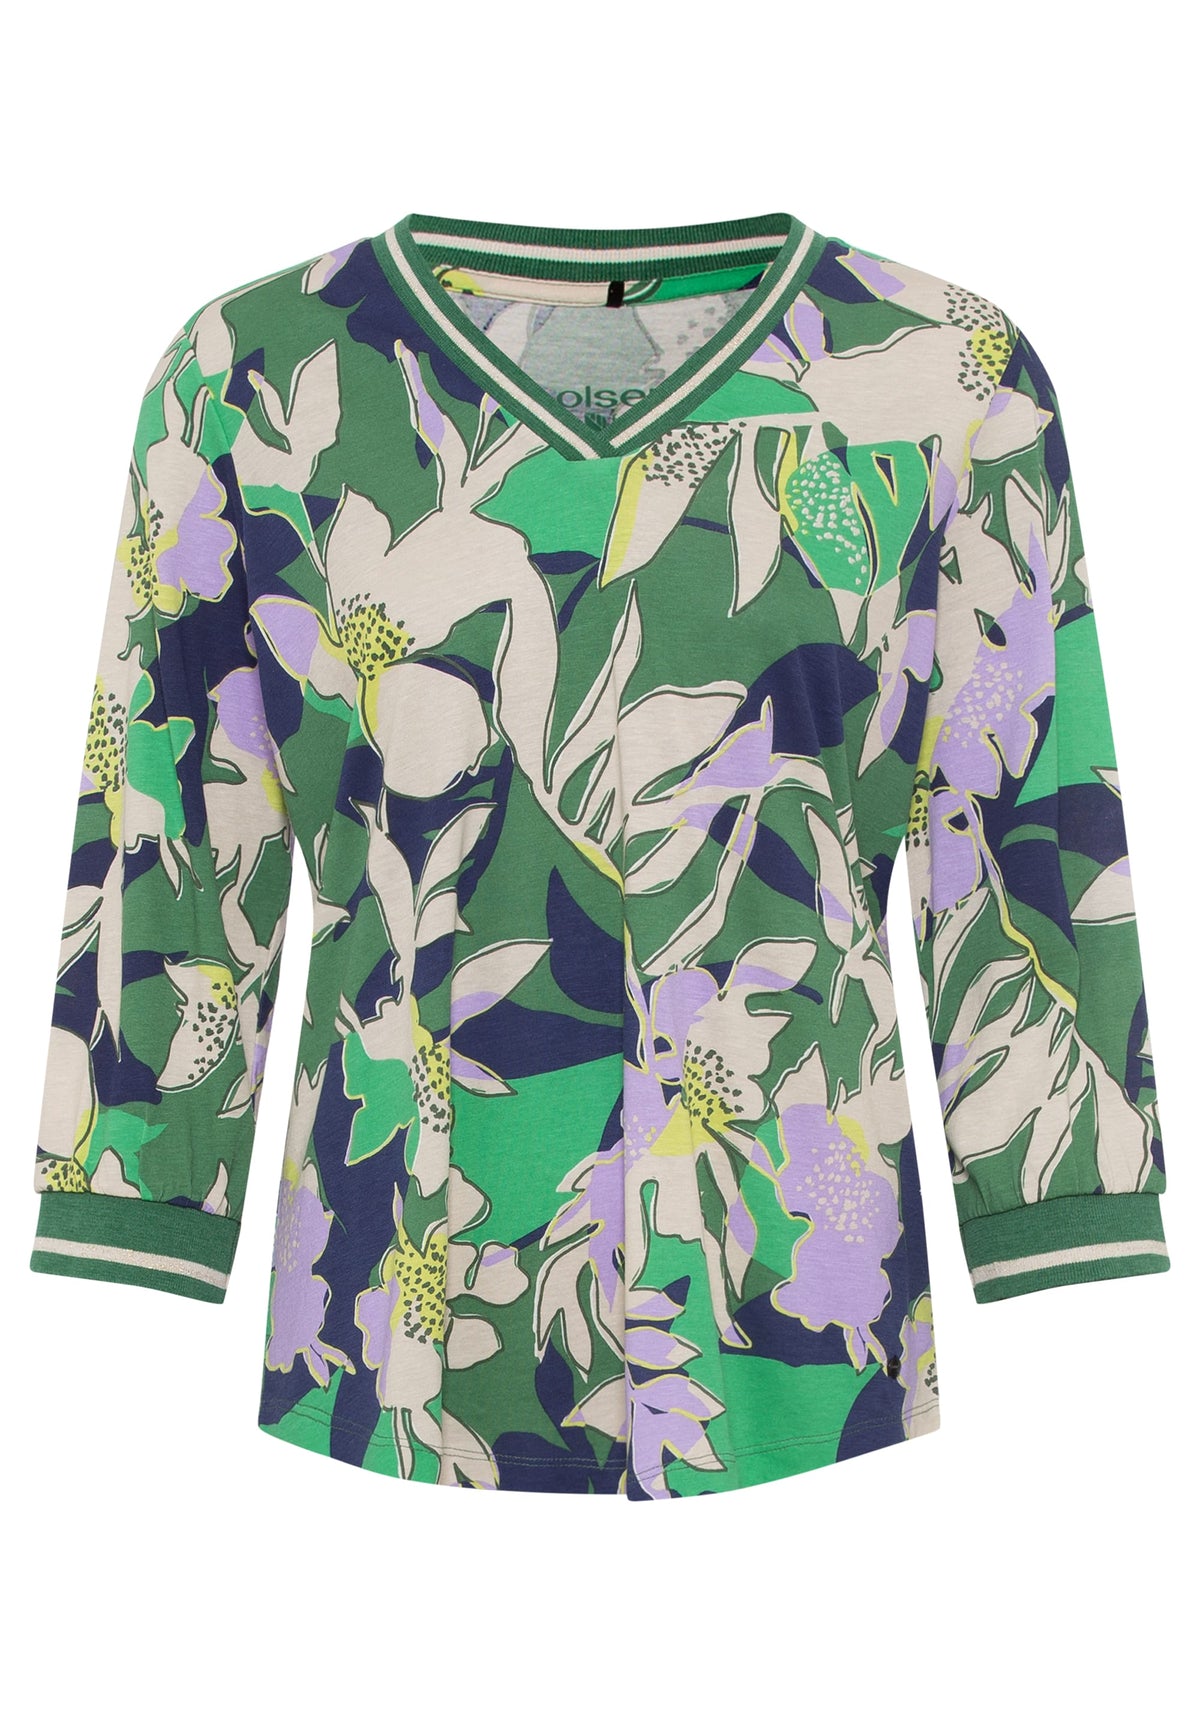 3/4 Sleeve Floral V-Neck T-Shirt containing TENCEL™ Modal